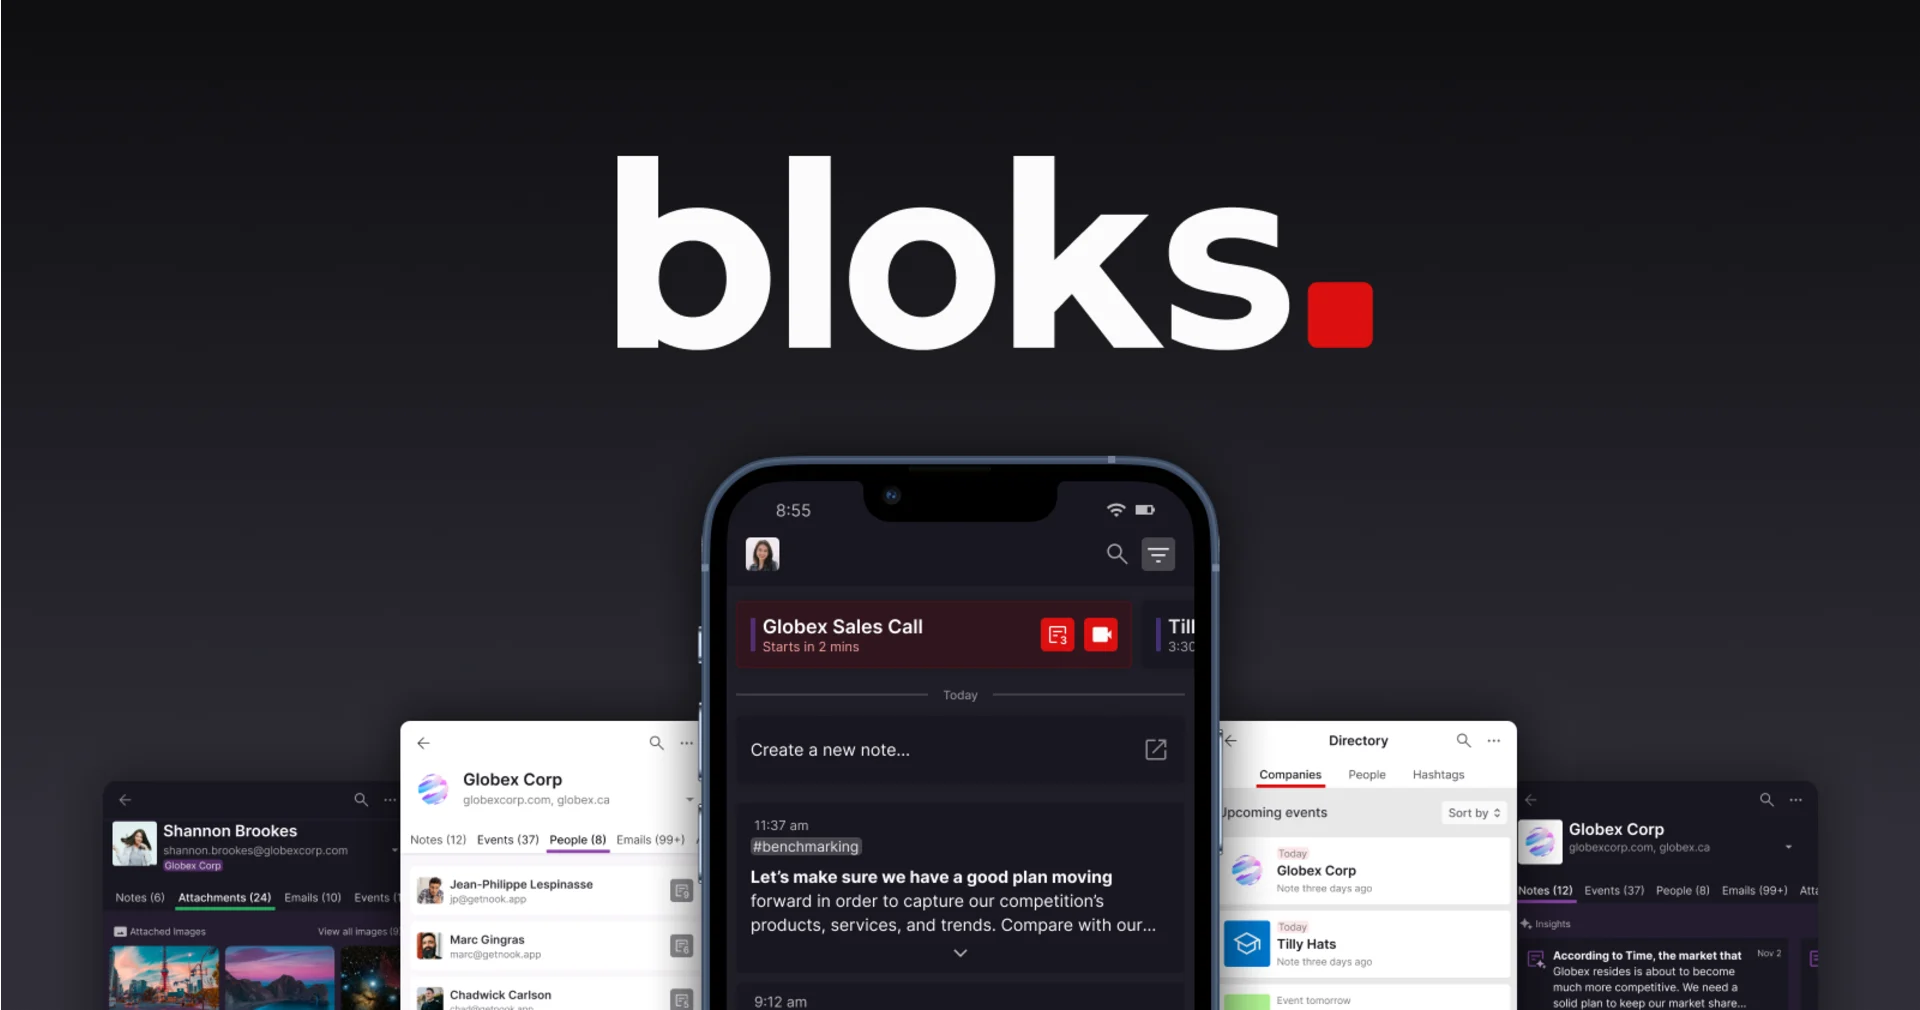 Bloks is an AI productivity app to help manage tasks, reminders, meetings and much more.